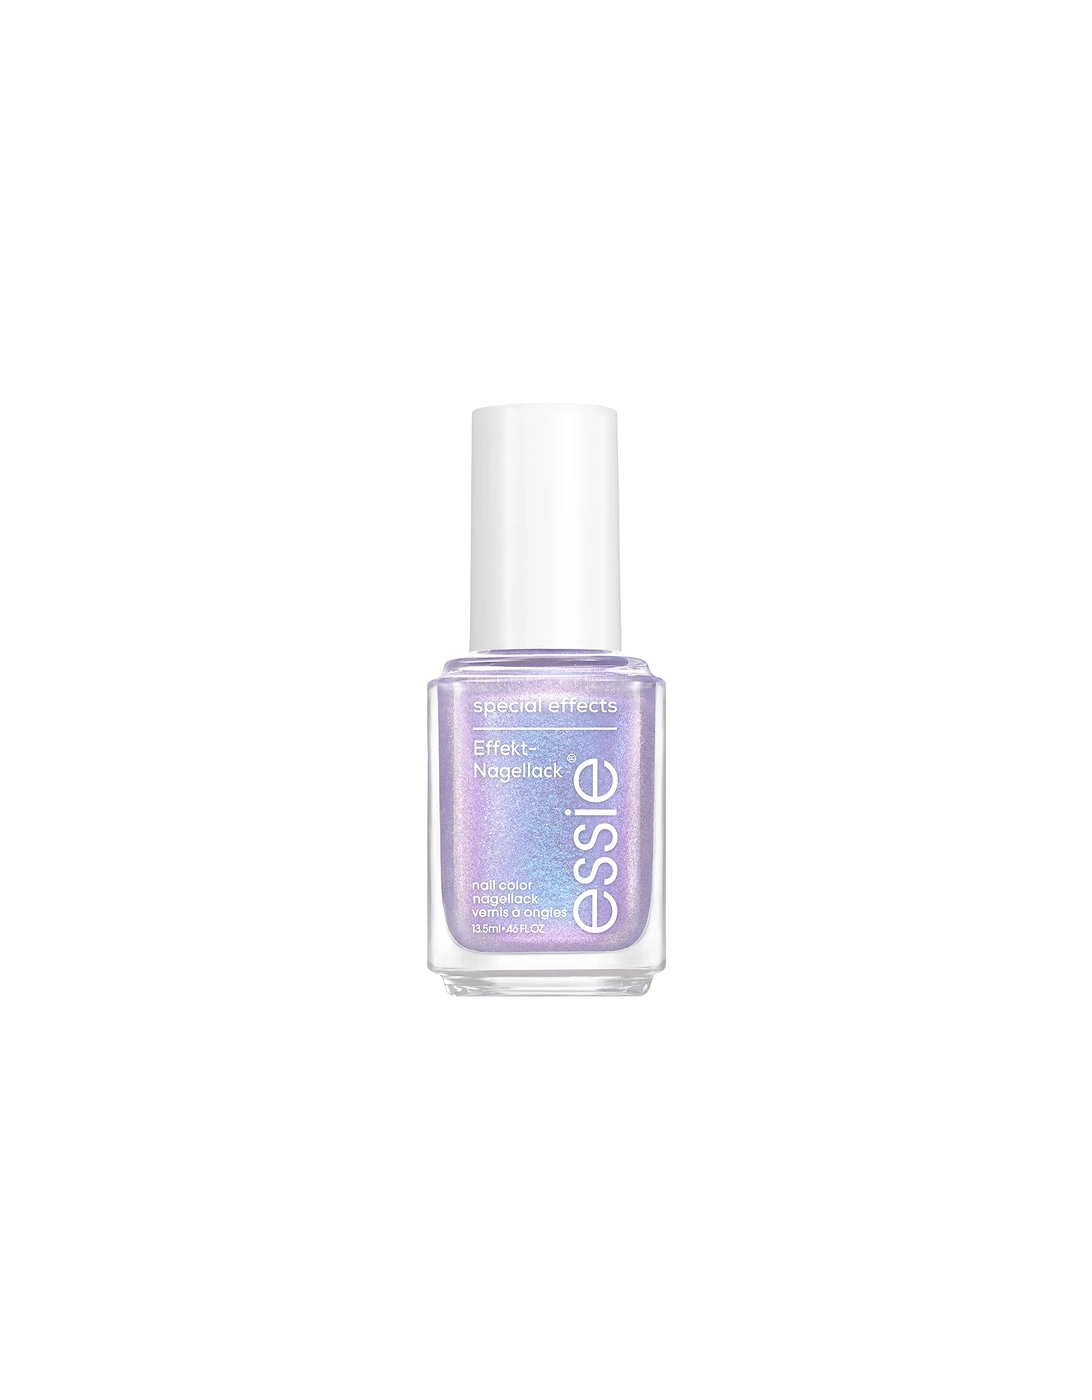 Original Nail Art Studio Special Effects Nail Polish Topcoat - Ethereal Escape, 2 of 1